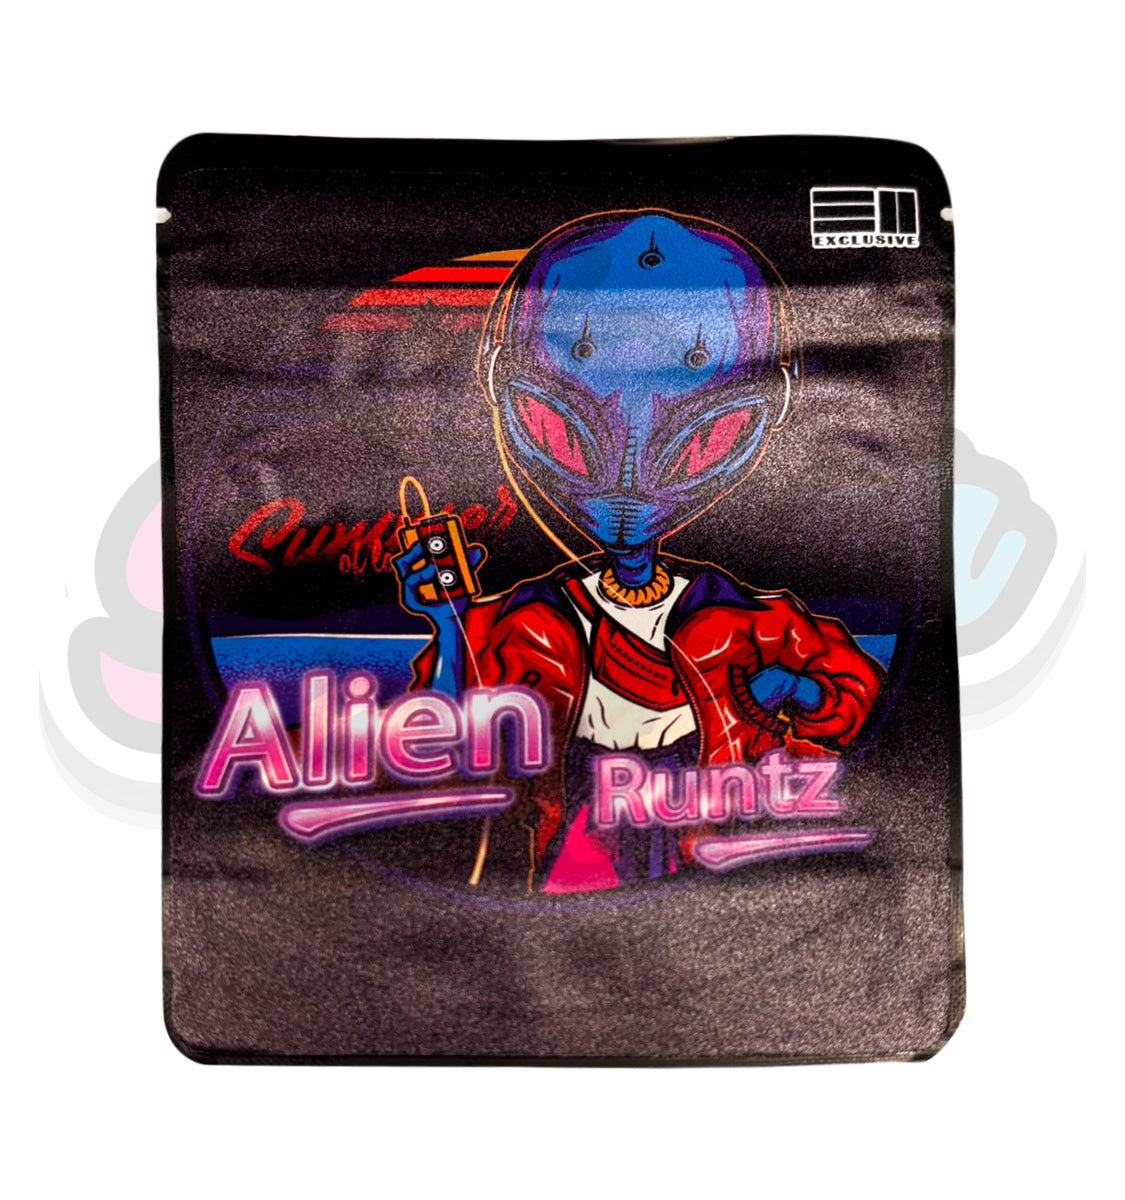 Brand New 311 Exclusive Designed Stickered Mylar Bags